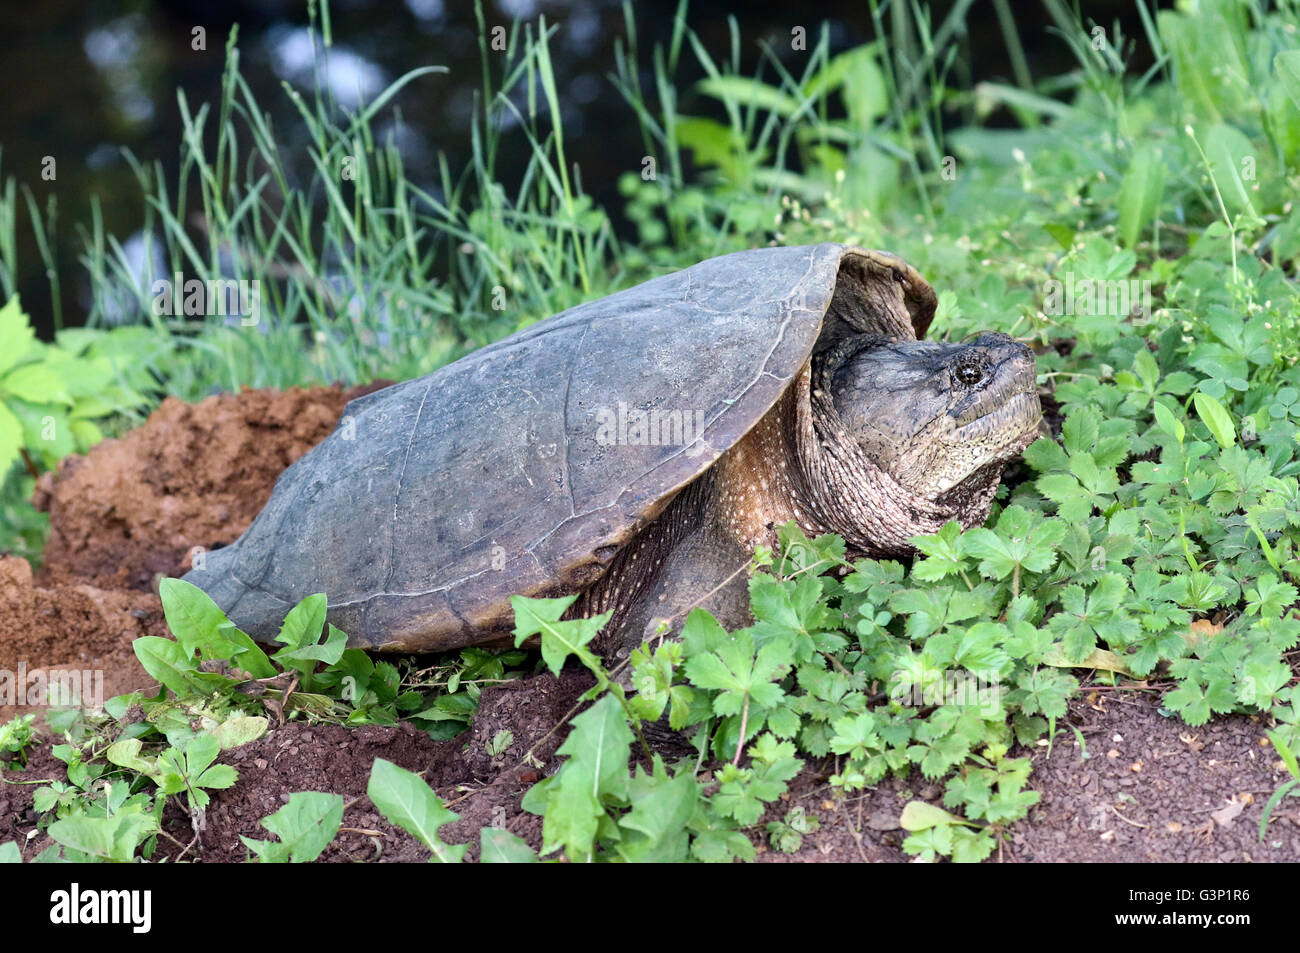 common snapping turtle Chelydra serpentina female on her nest. Stock Photo